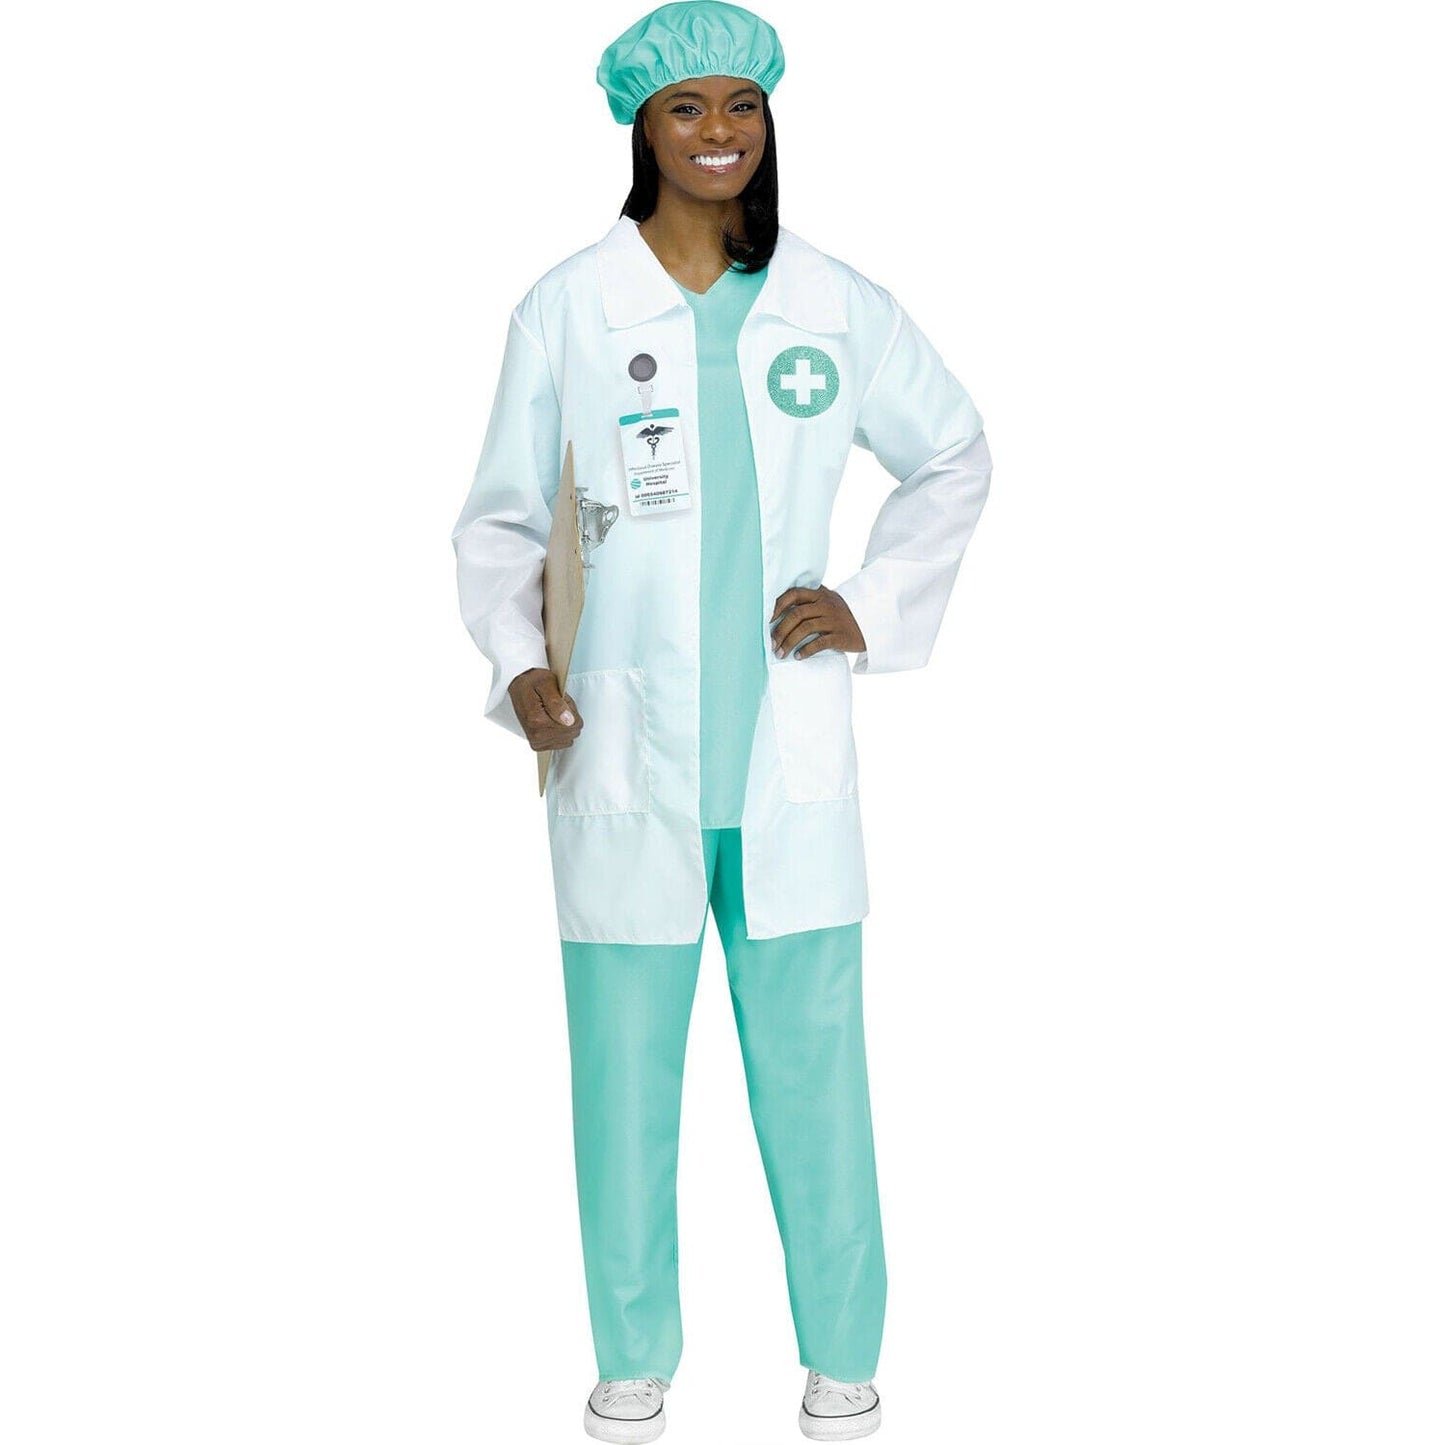 Infectious Disease Doctor Adult Costume